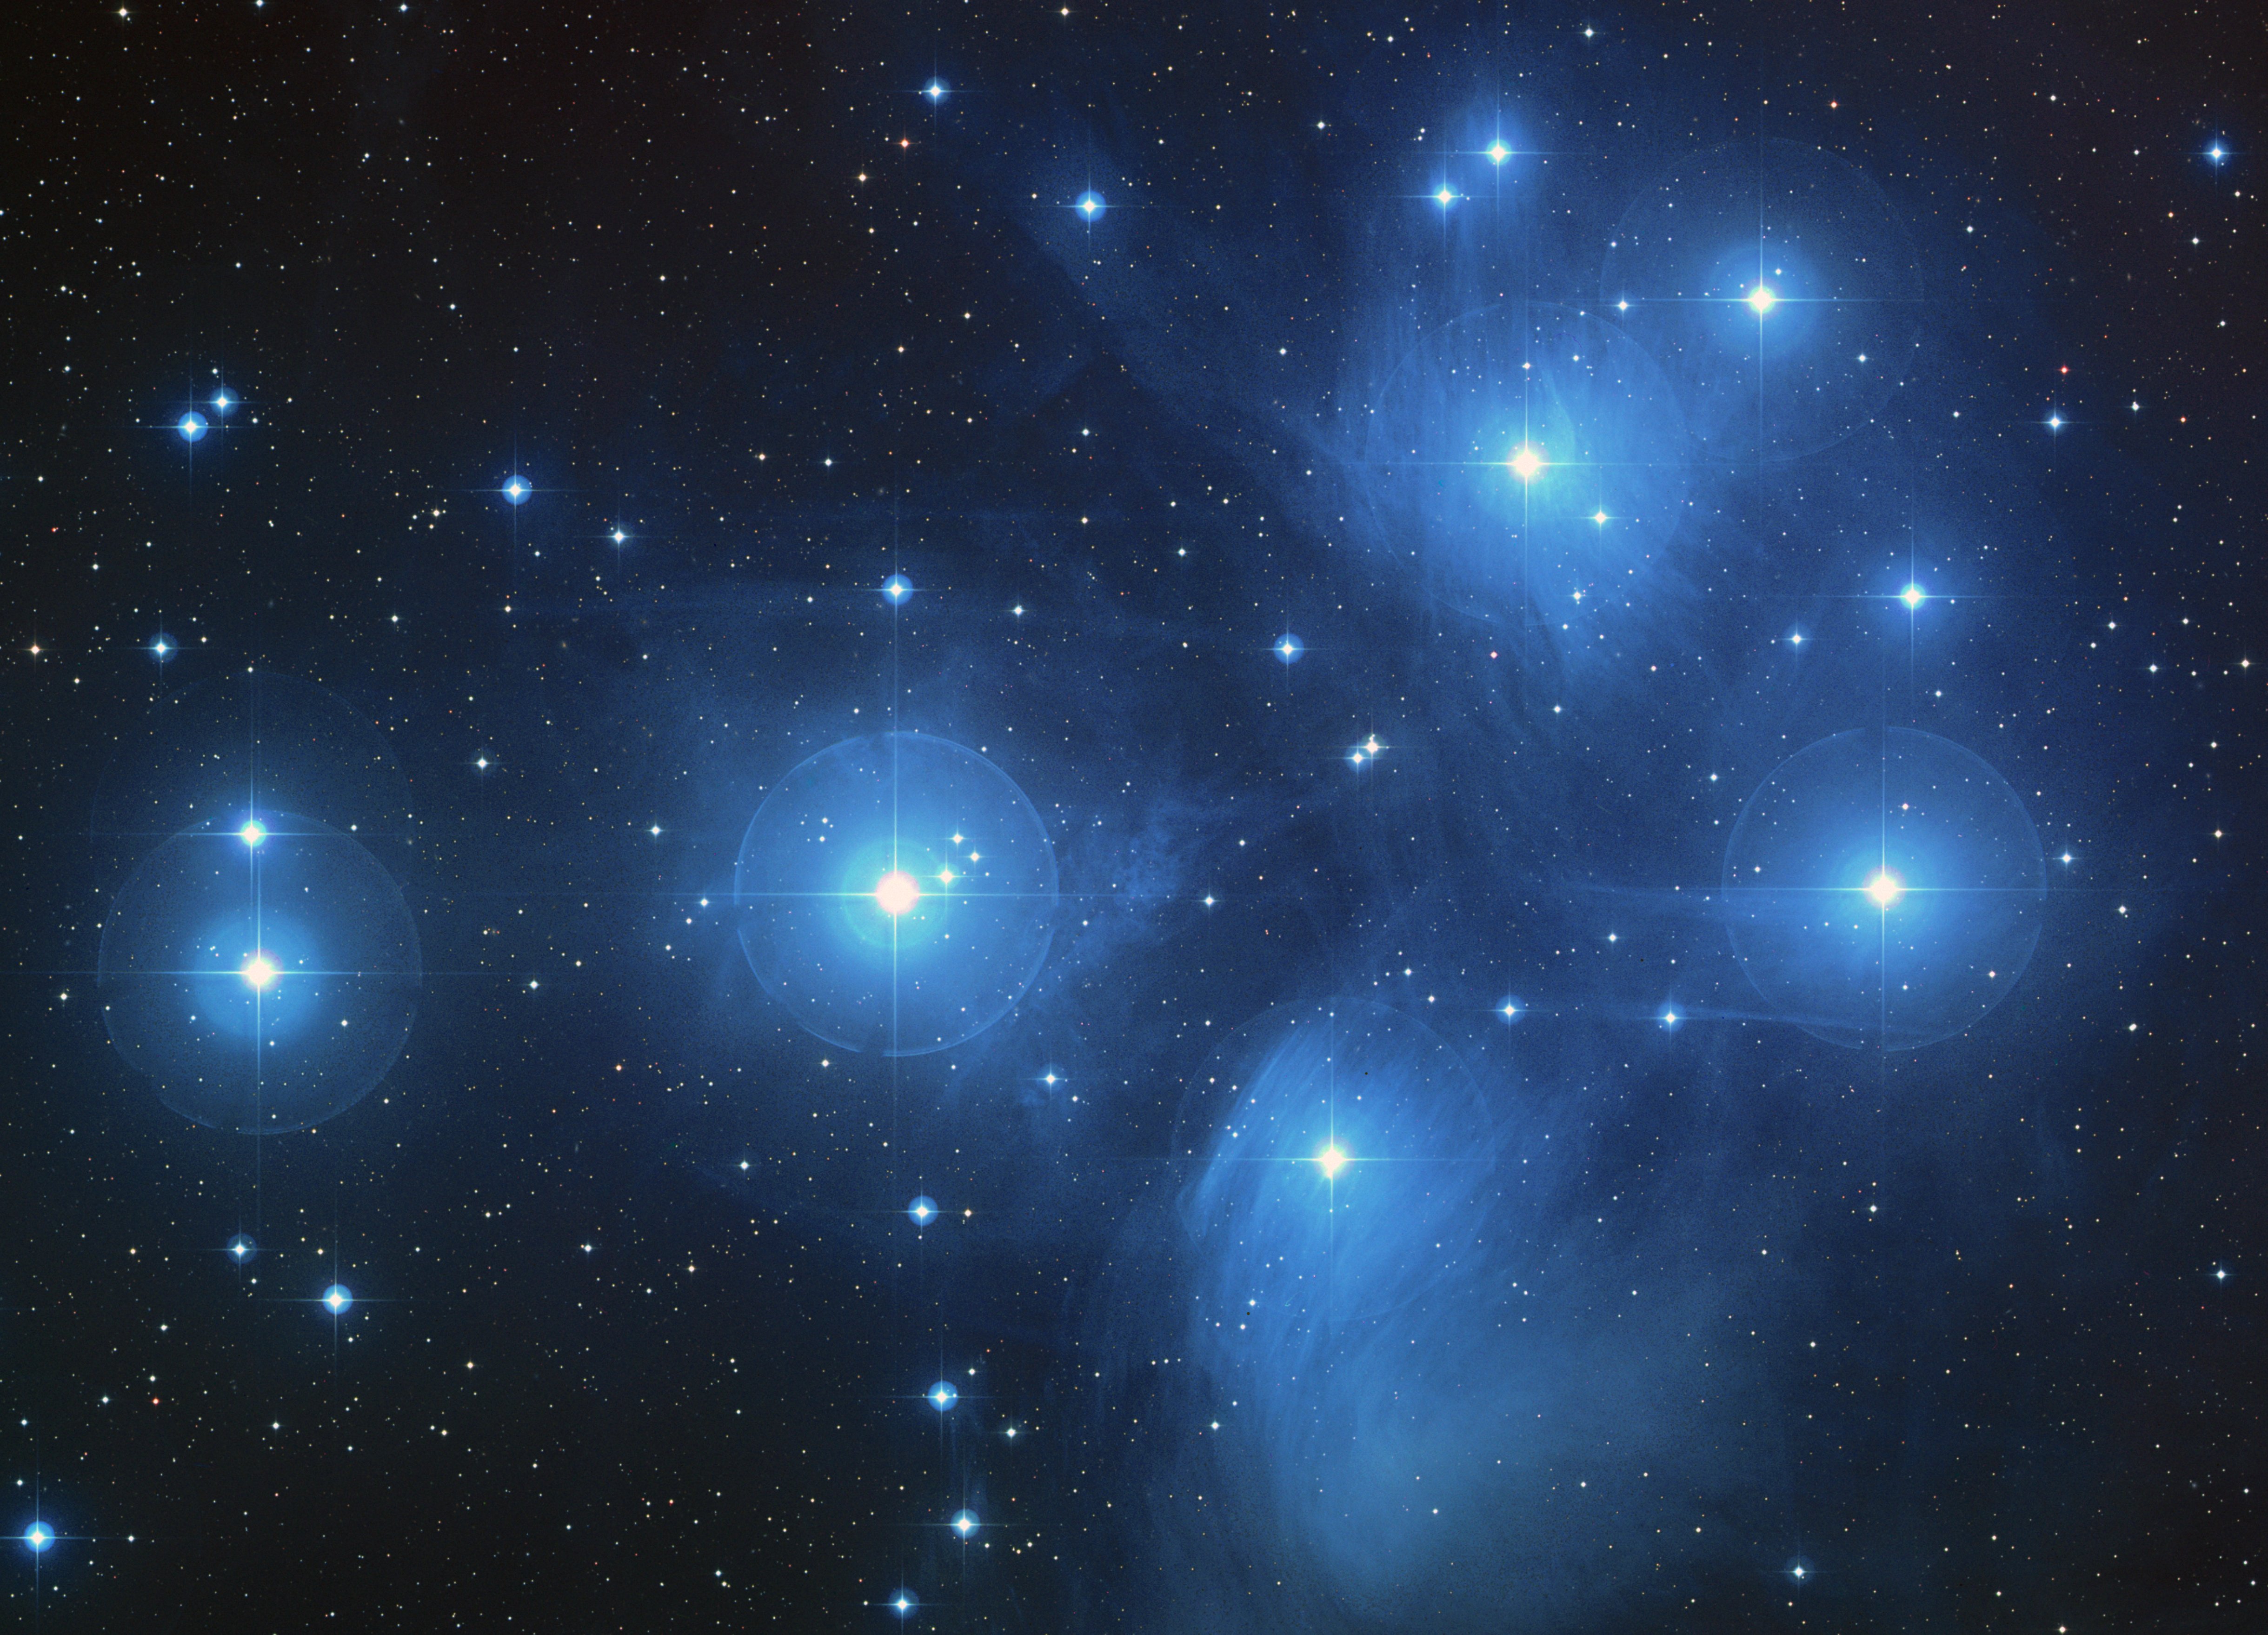 Image of the constellation Pleiades. 